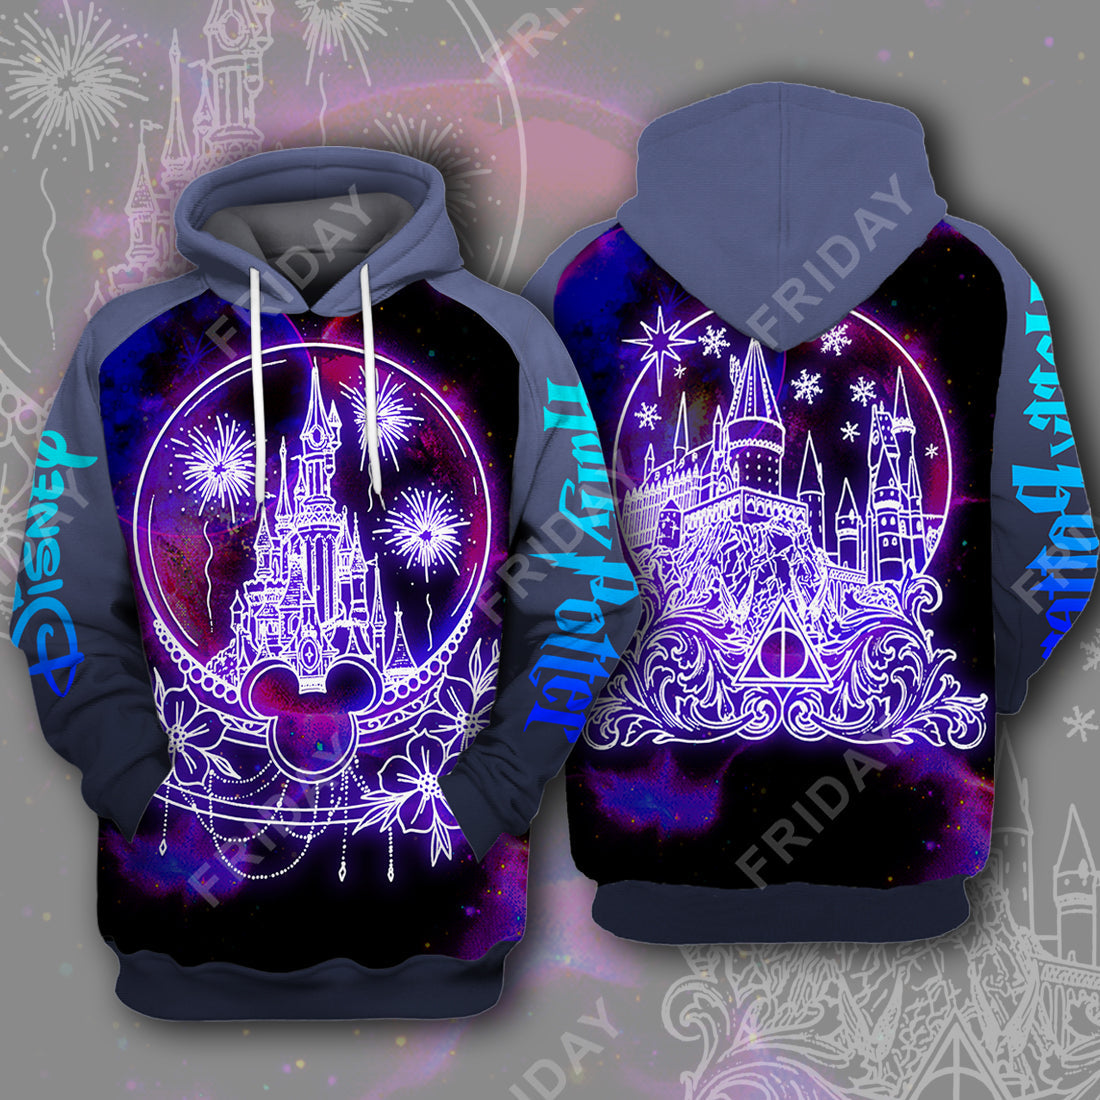 Unifinz DN HP T-shirt DN and HP Castle In Glass Sphere 3D Print T-shirt Amazing High Quality  DN HP Hoodie Sweater Tank  2023